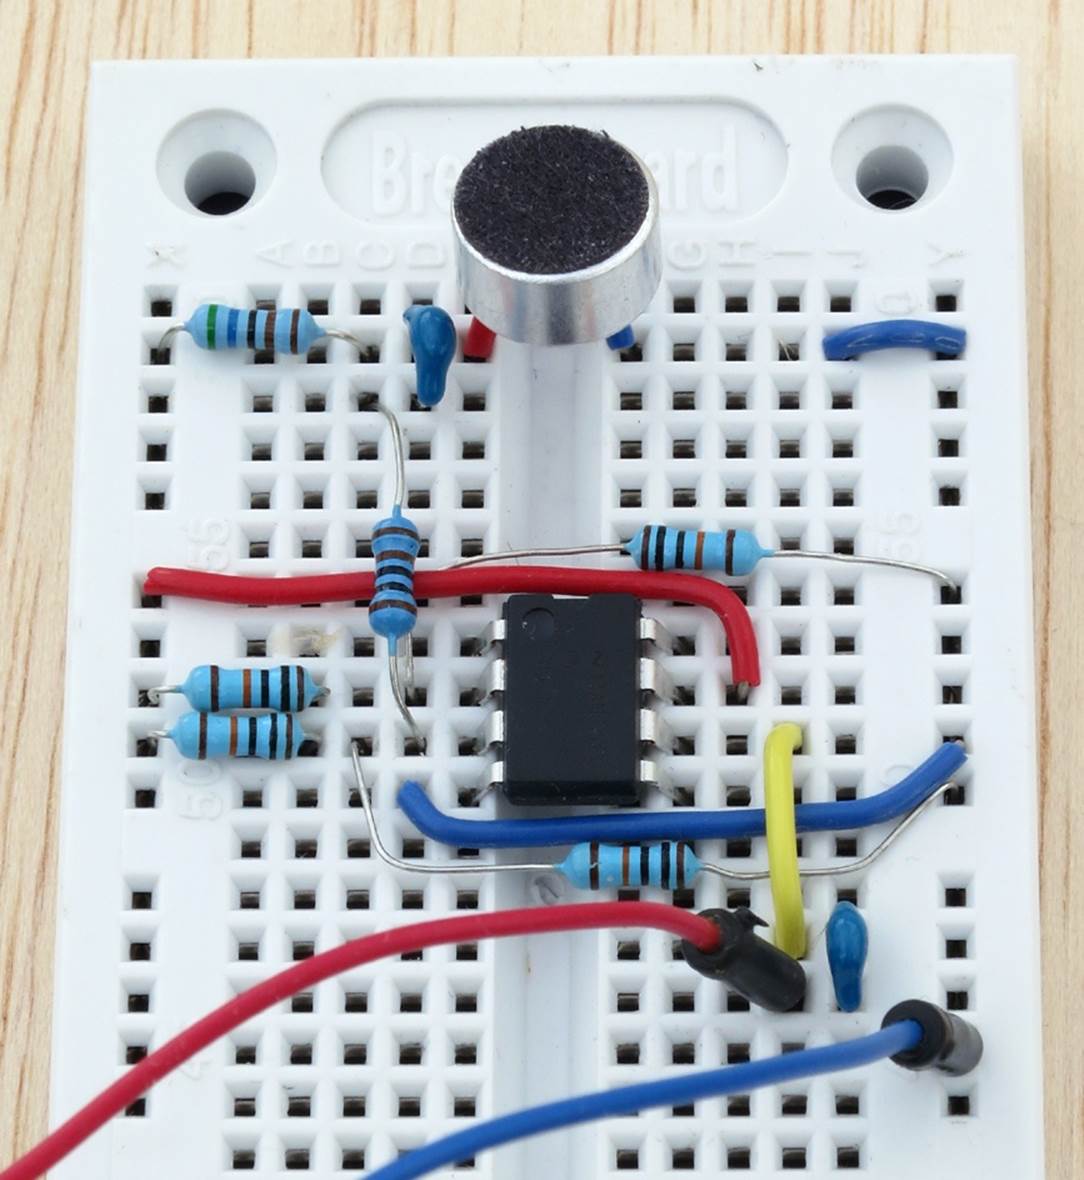 A circuit to assess the amplified output from an electret microphone. The red and blue jumper wires below the circuit are connected with a meter set to measure AC volts. The power supply for the buses of the breadboard is a 9V battery (not shown here).